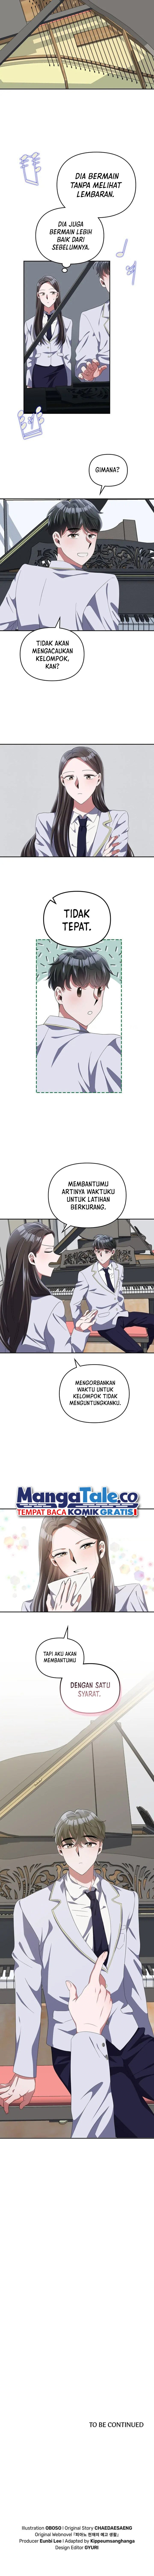 The Life of a Piano Genius Chapter 04 Image 11